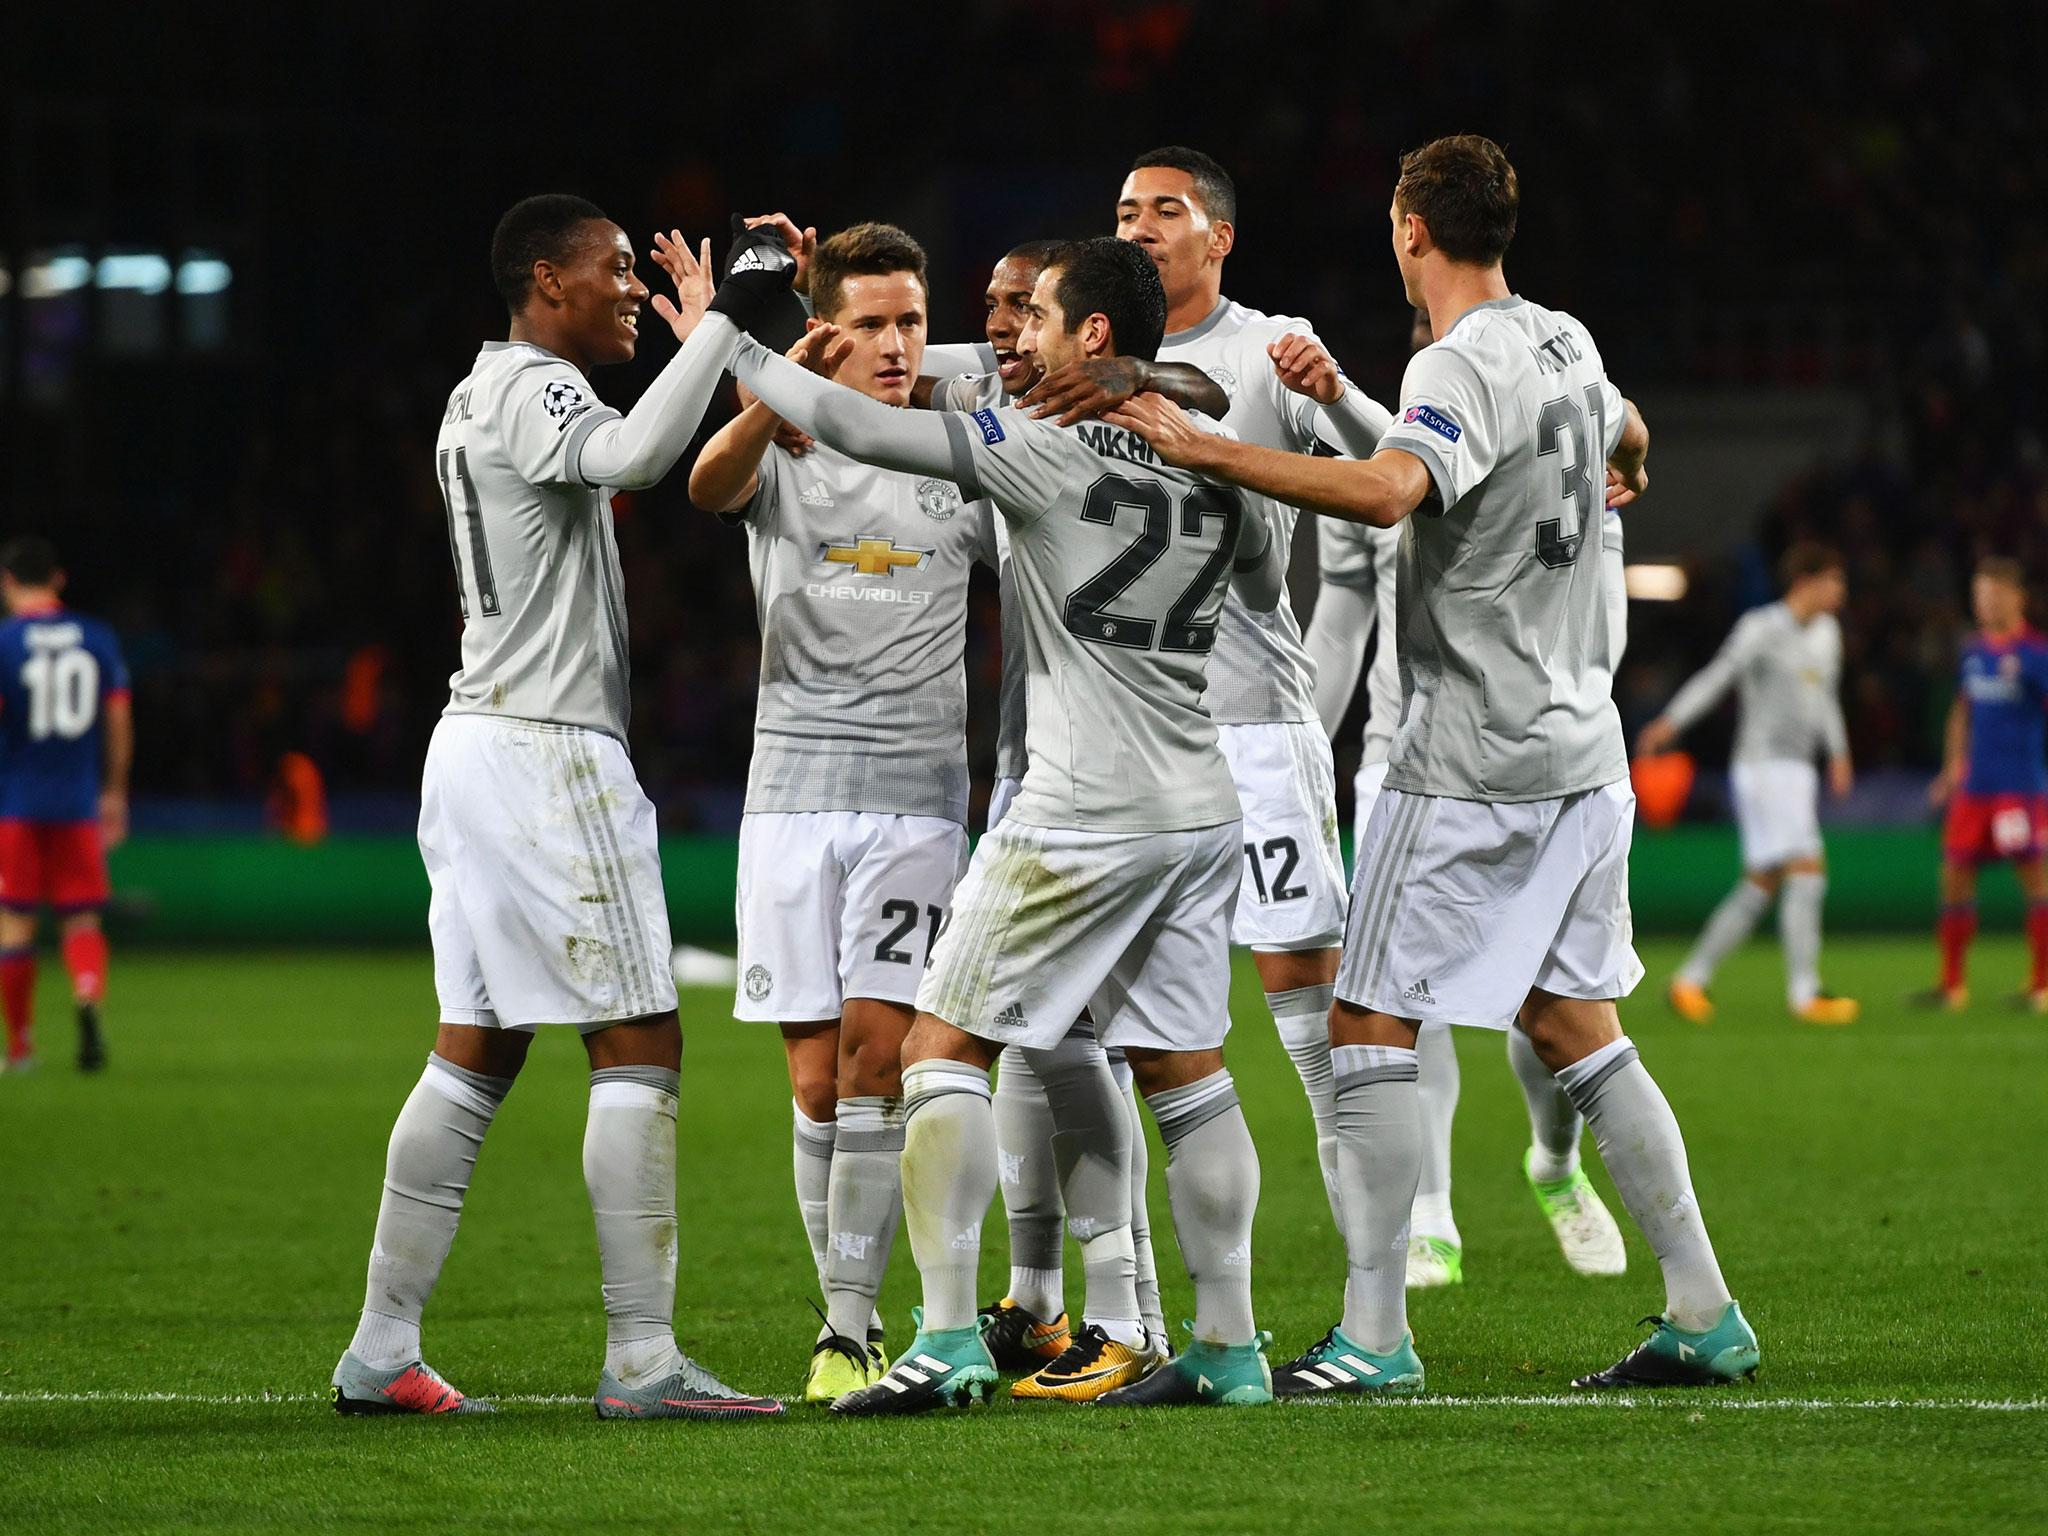 Manchester United dominated proceedings from the off